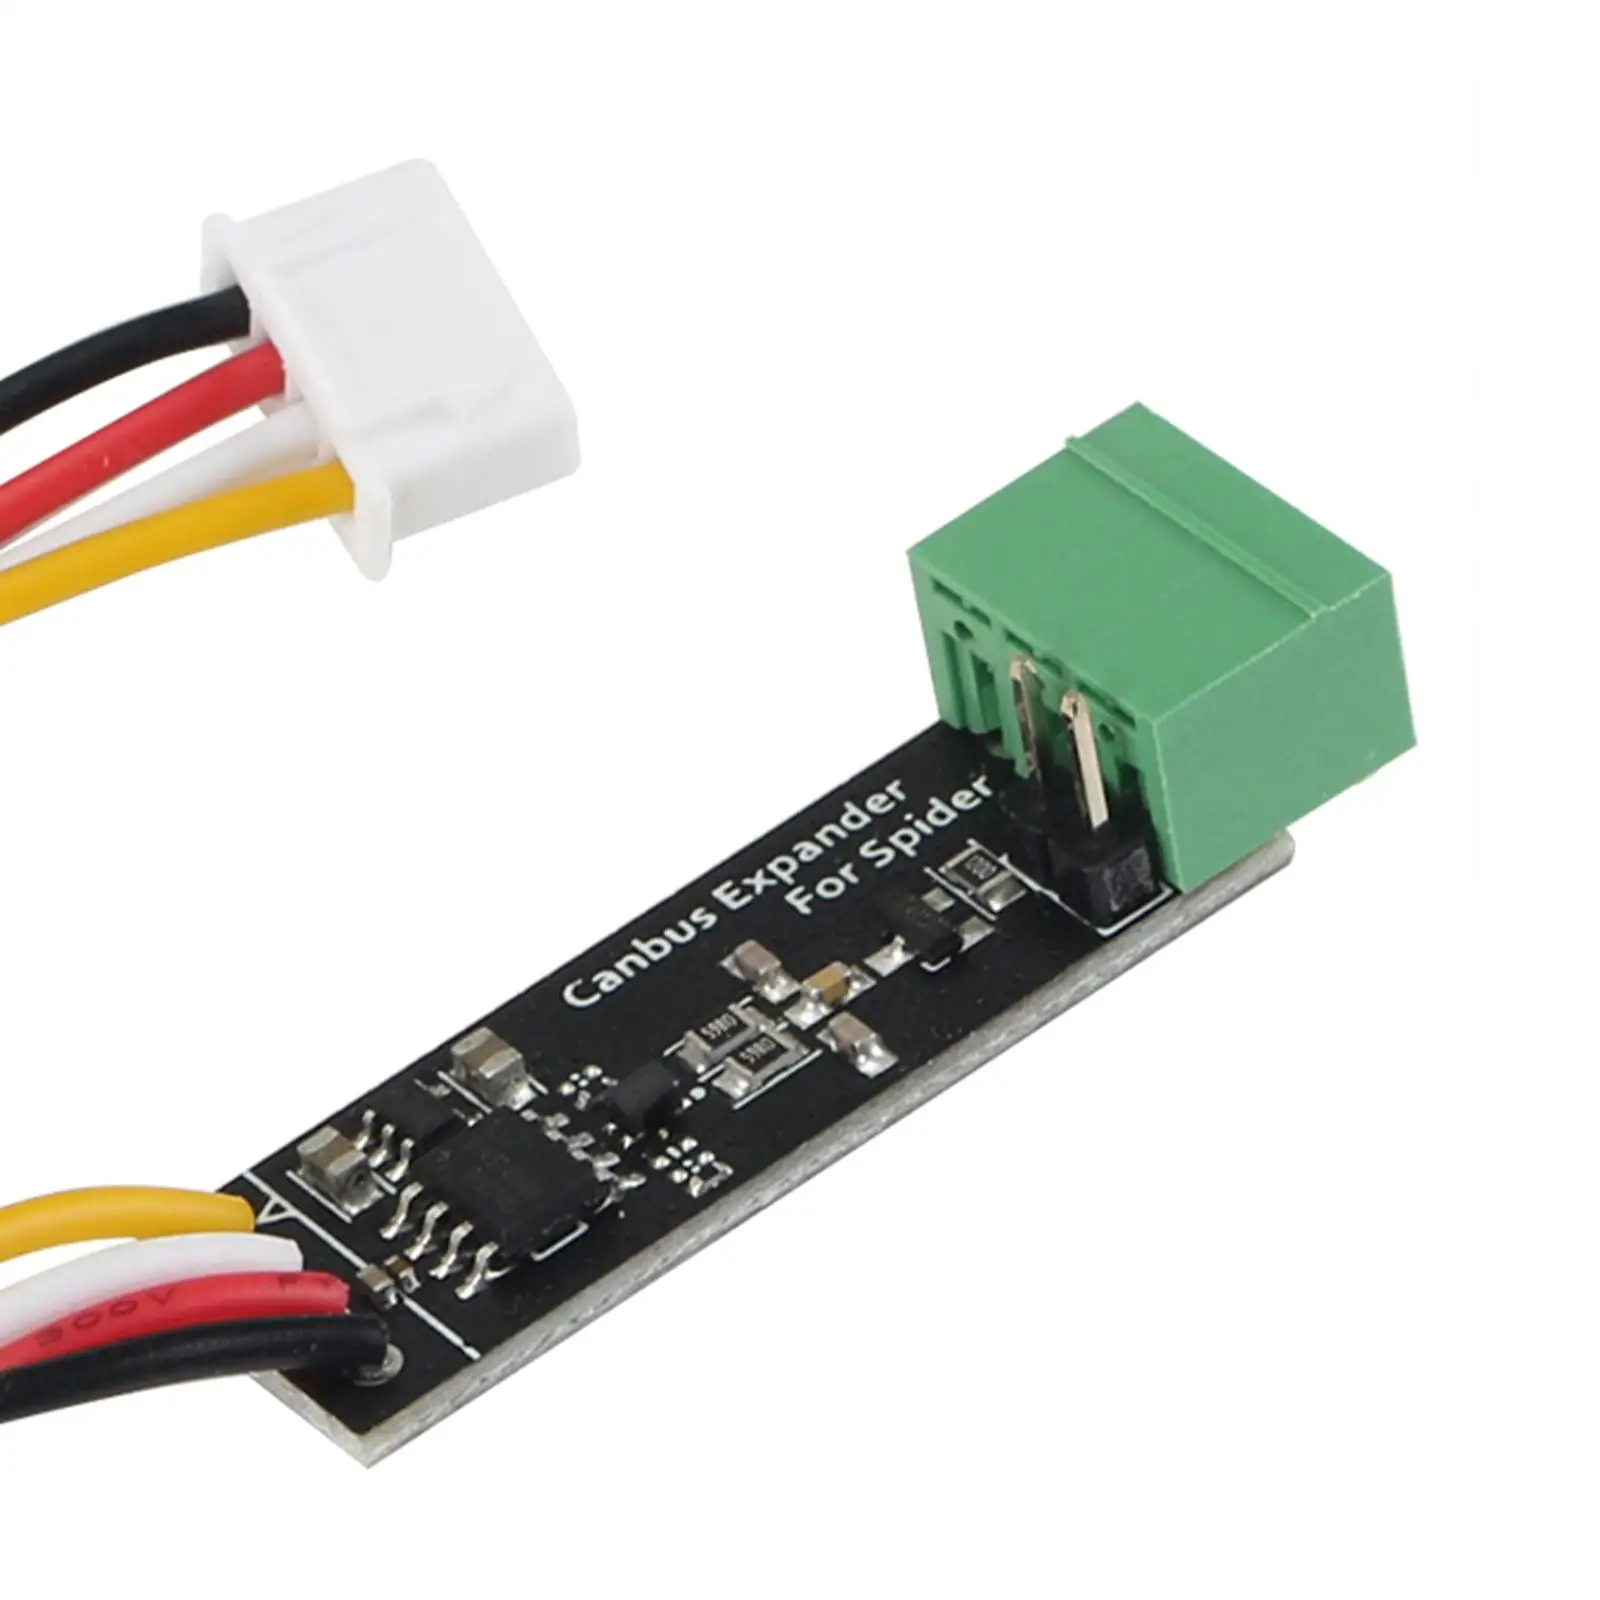 Canbus Expander Module Transceiver Replaces Durable Adapter for Spider Board